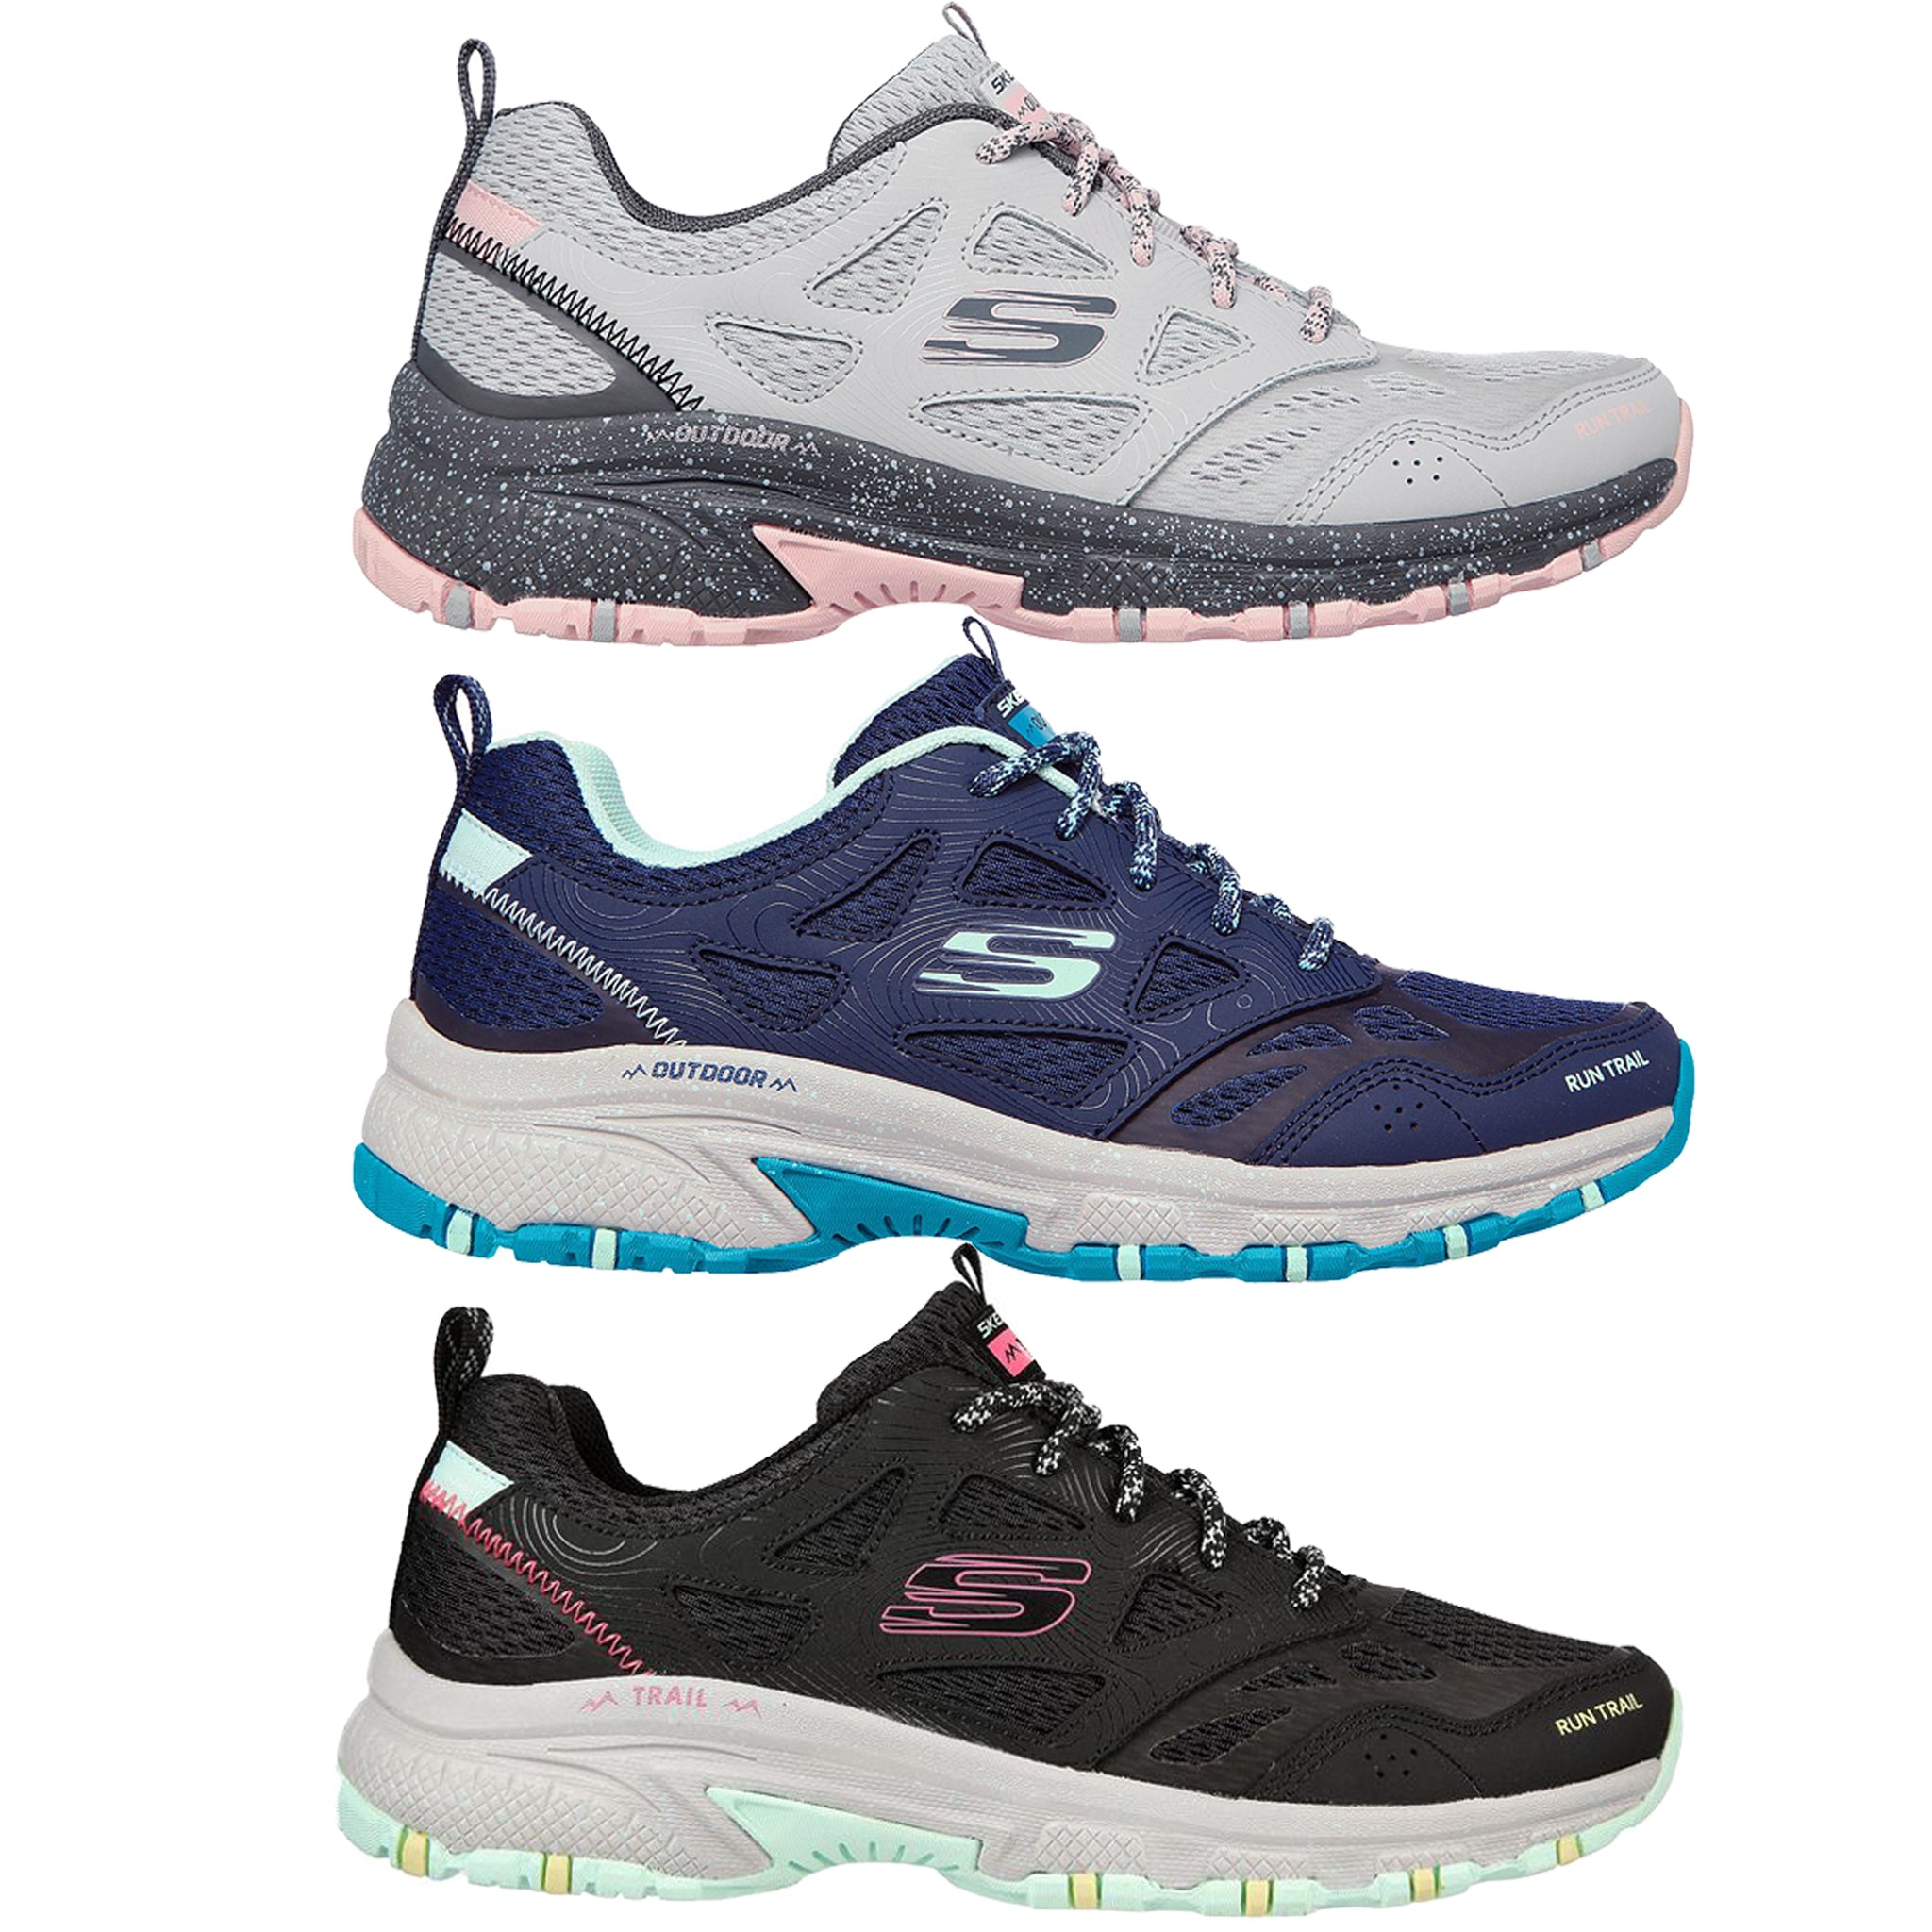 Skechers Women's 149821 Pure Escapade Trail Running Shoes – That Shoe Store and More